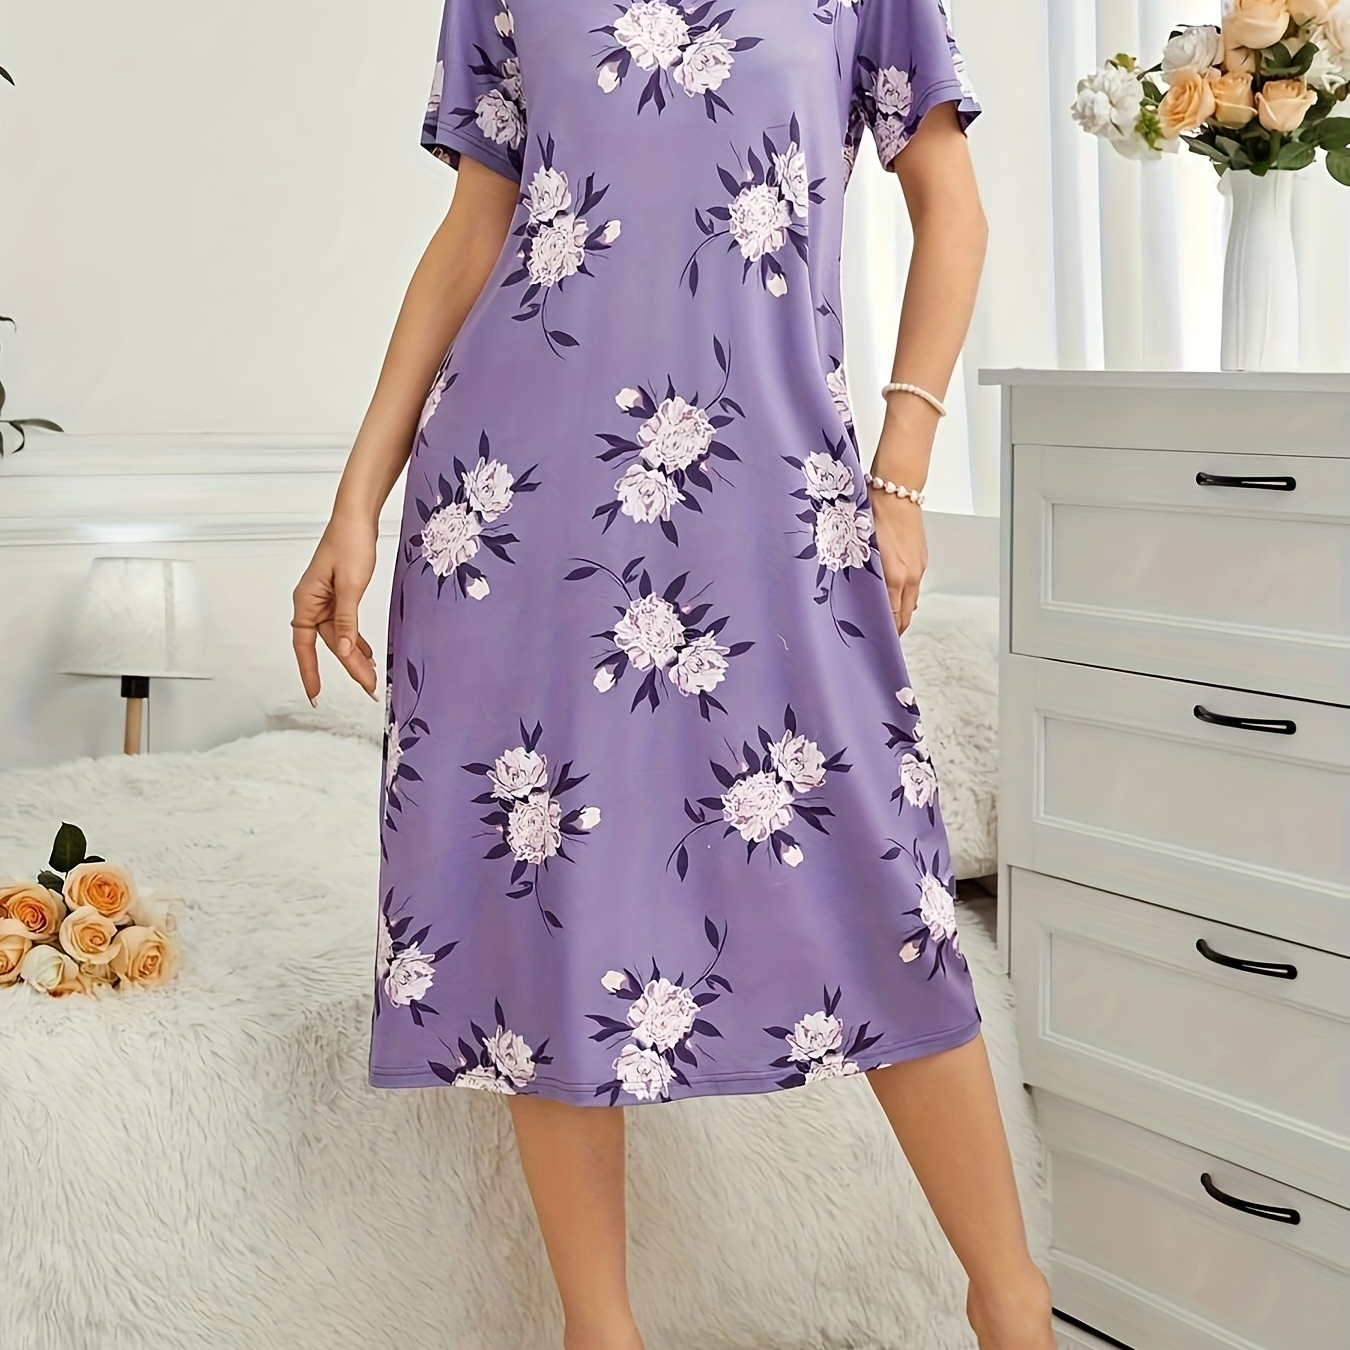 

Floral Print Nightgown, Casual Short Sleeve Round Neck Loose Fit Dress, Women's Sleepwear